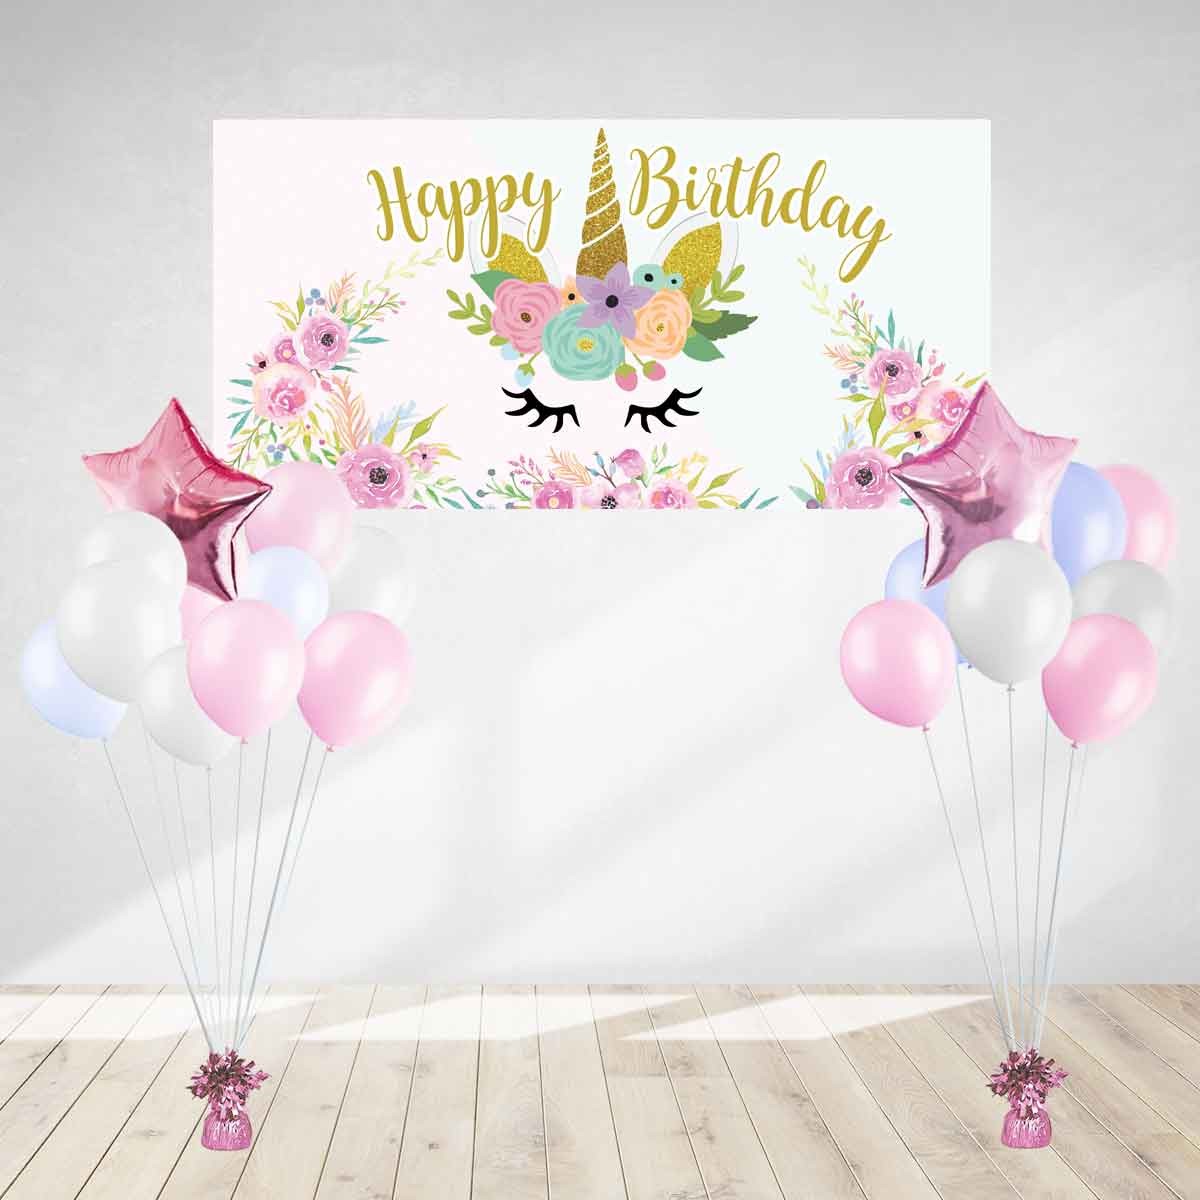 Load image into Gallery viewer, Magical Unicorn Birthday Banner with Lovely matching helium balloons.
